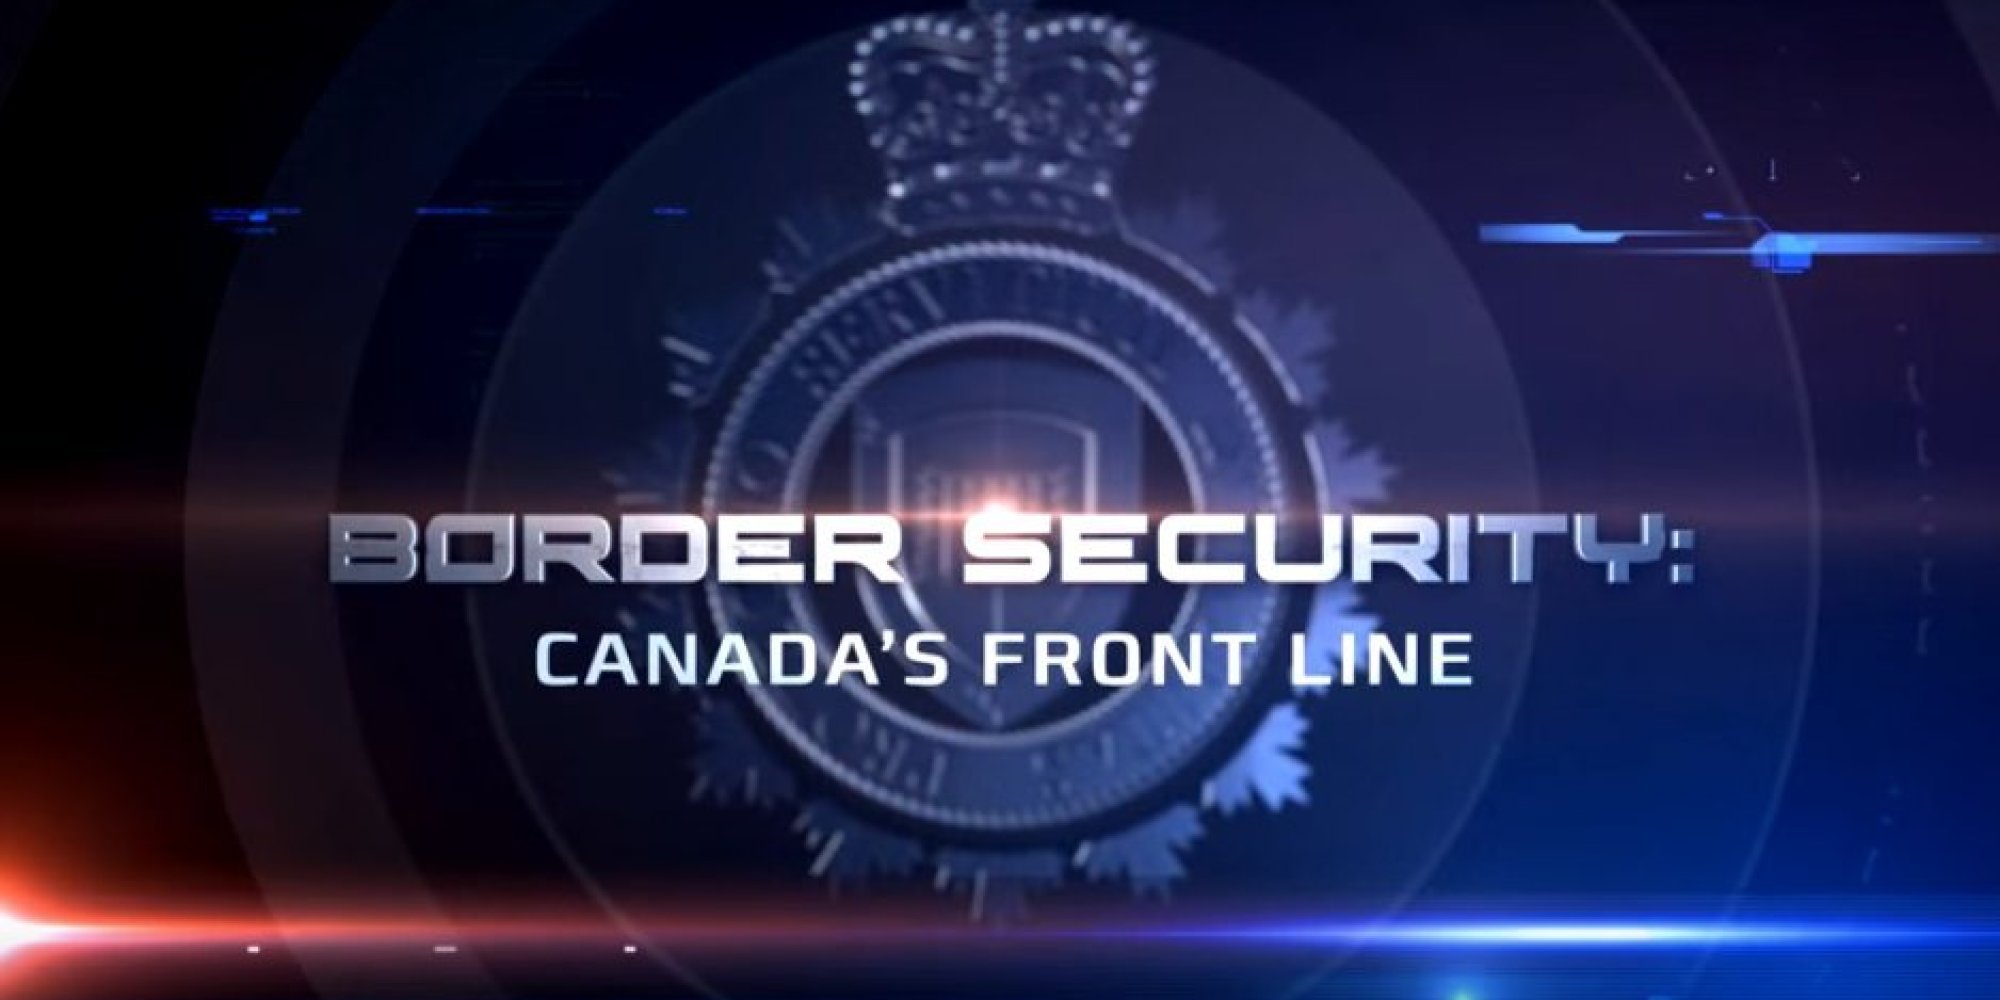 Where to watch border security canada's front line